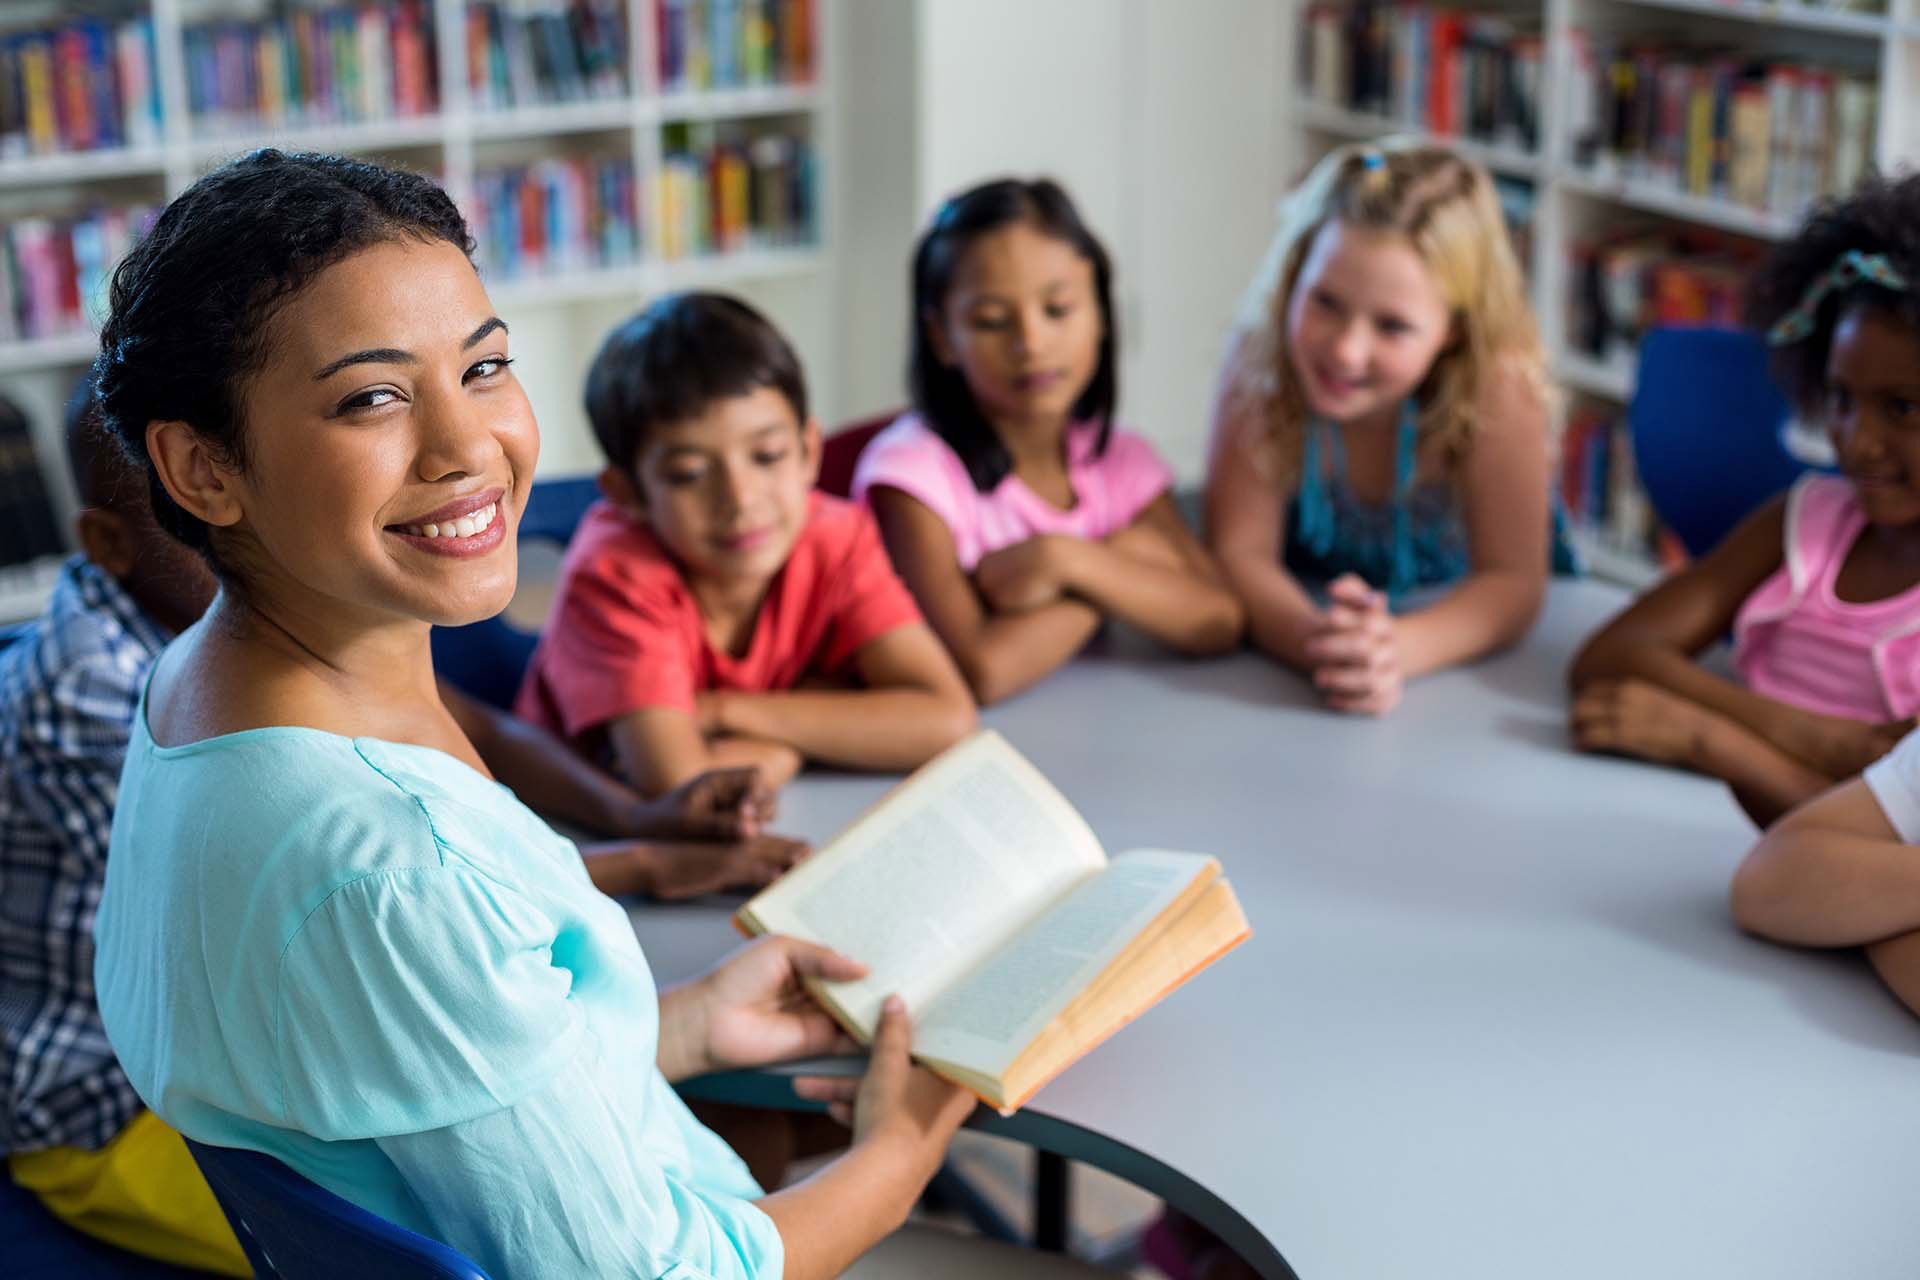 Elementary school teacher smiling and reading a book to a group of young students in a library